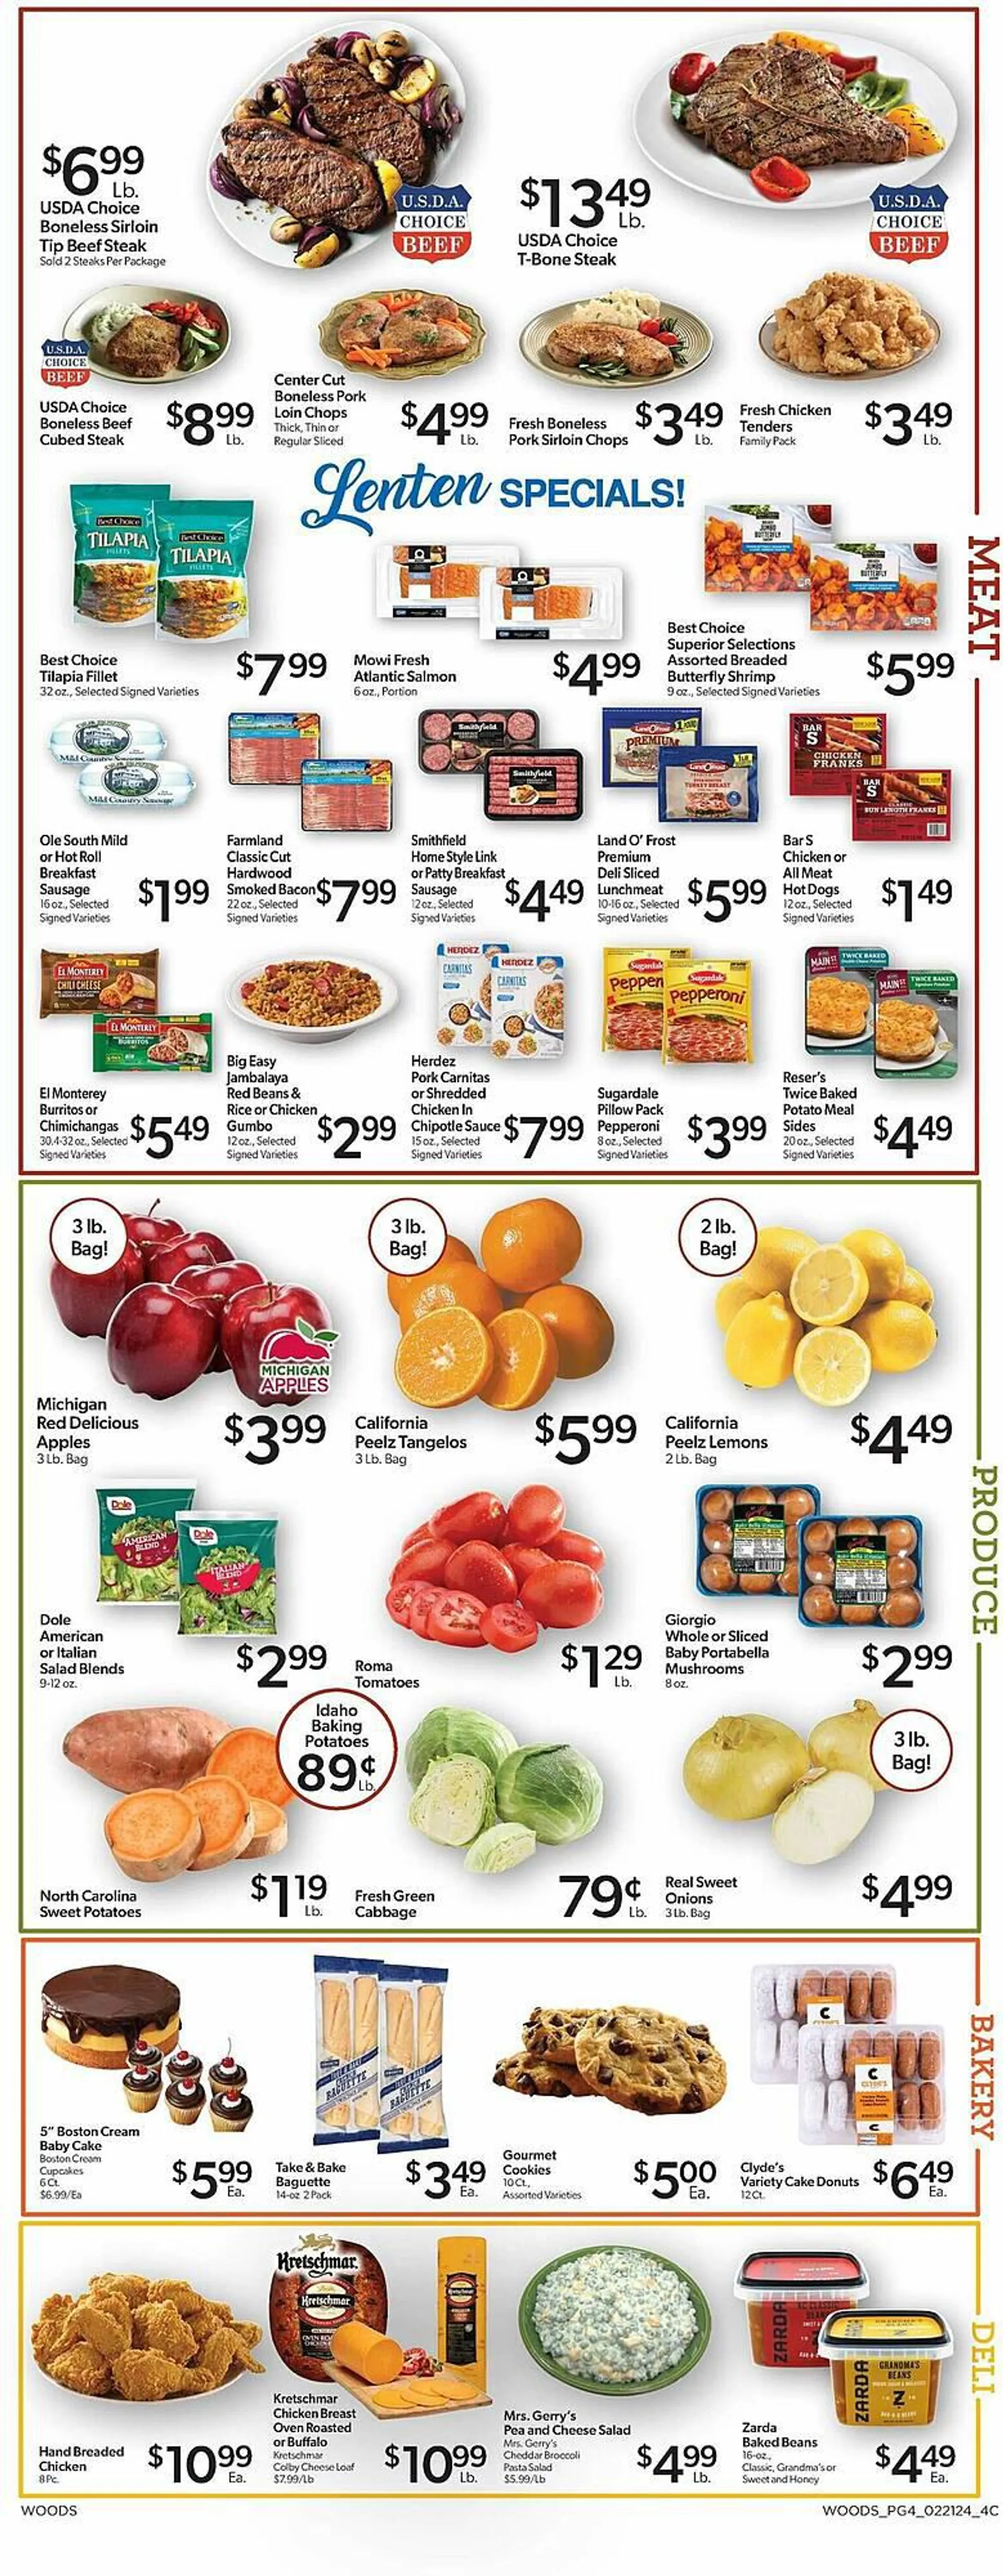 Weekly ad Woods Supermarket Weekly Ad from February 21 to February 27 2024 - Page 4